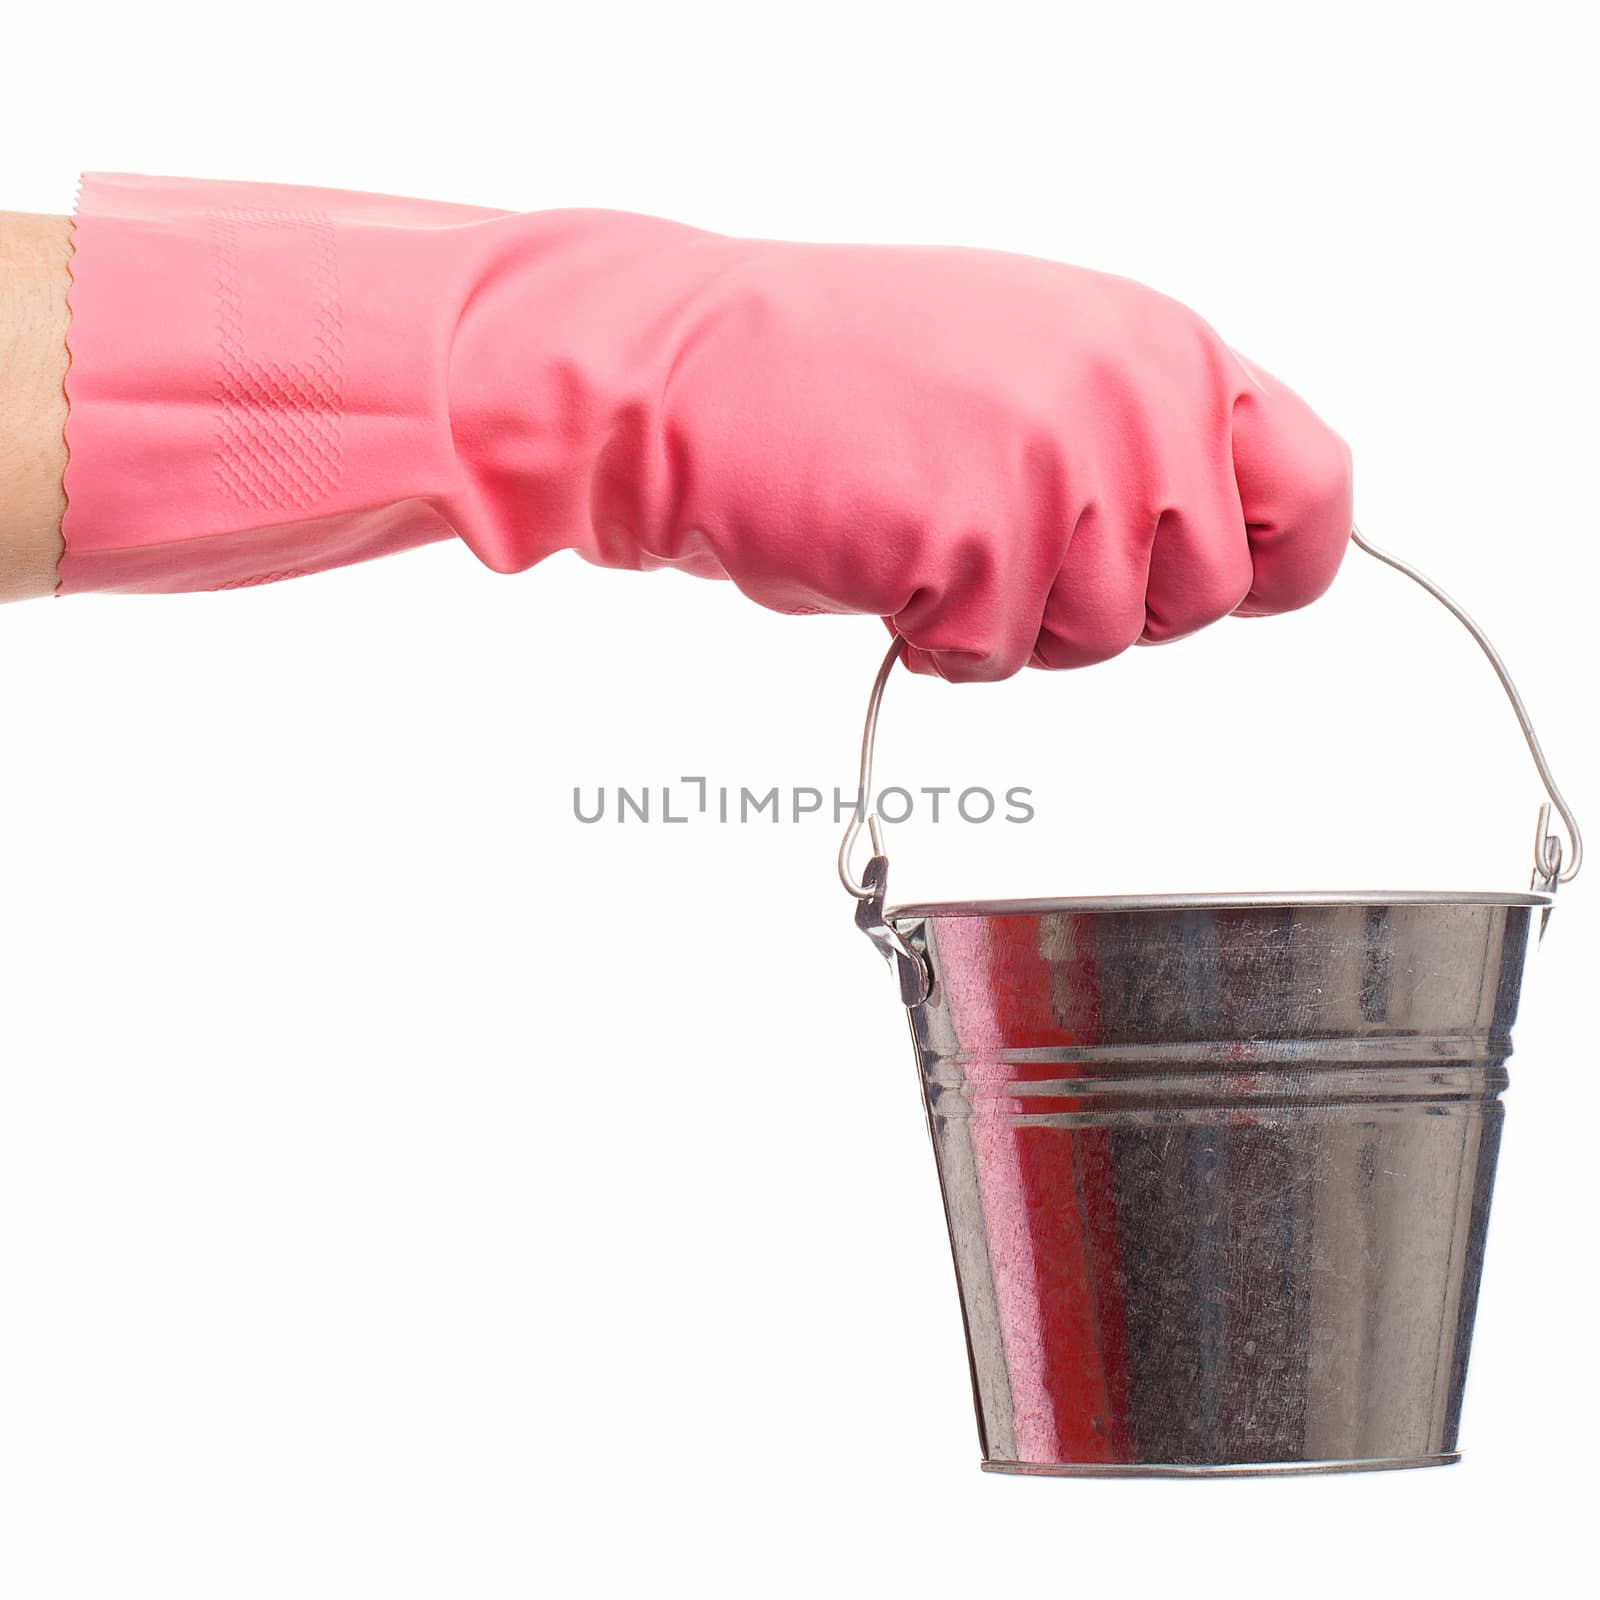 Hand in a pink domestic glove holding silver pail isolated over white background